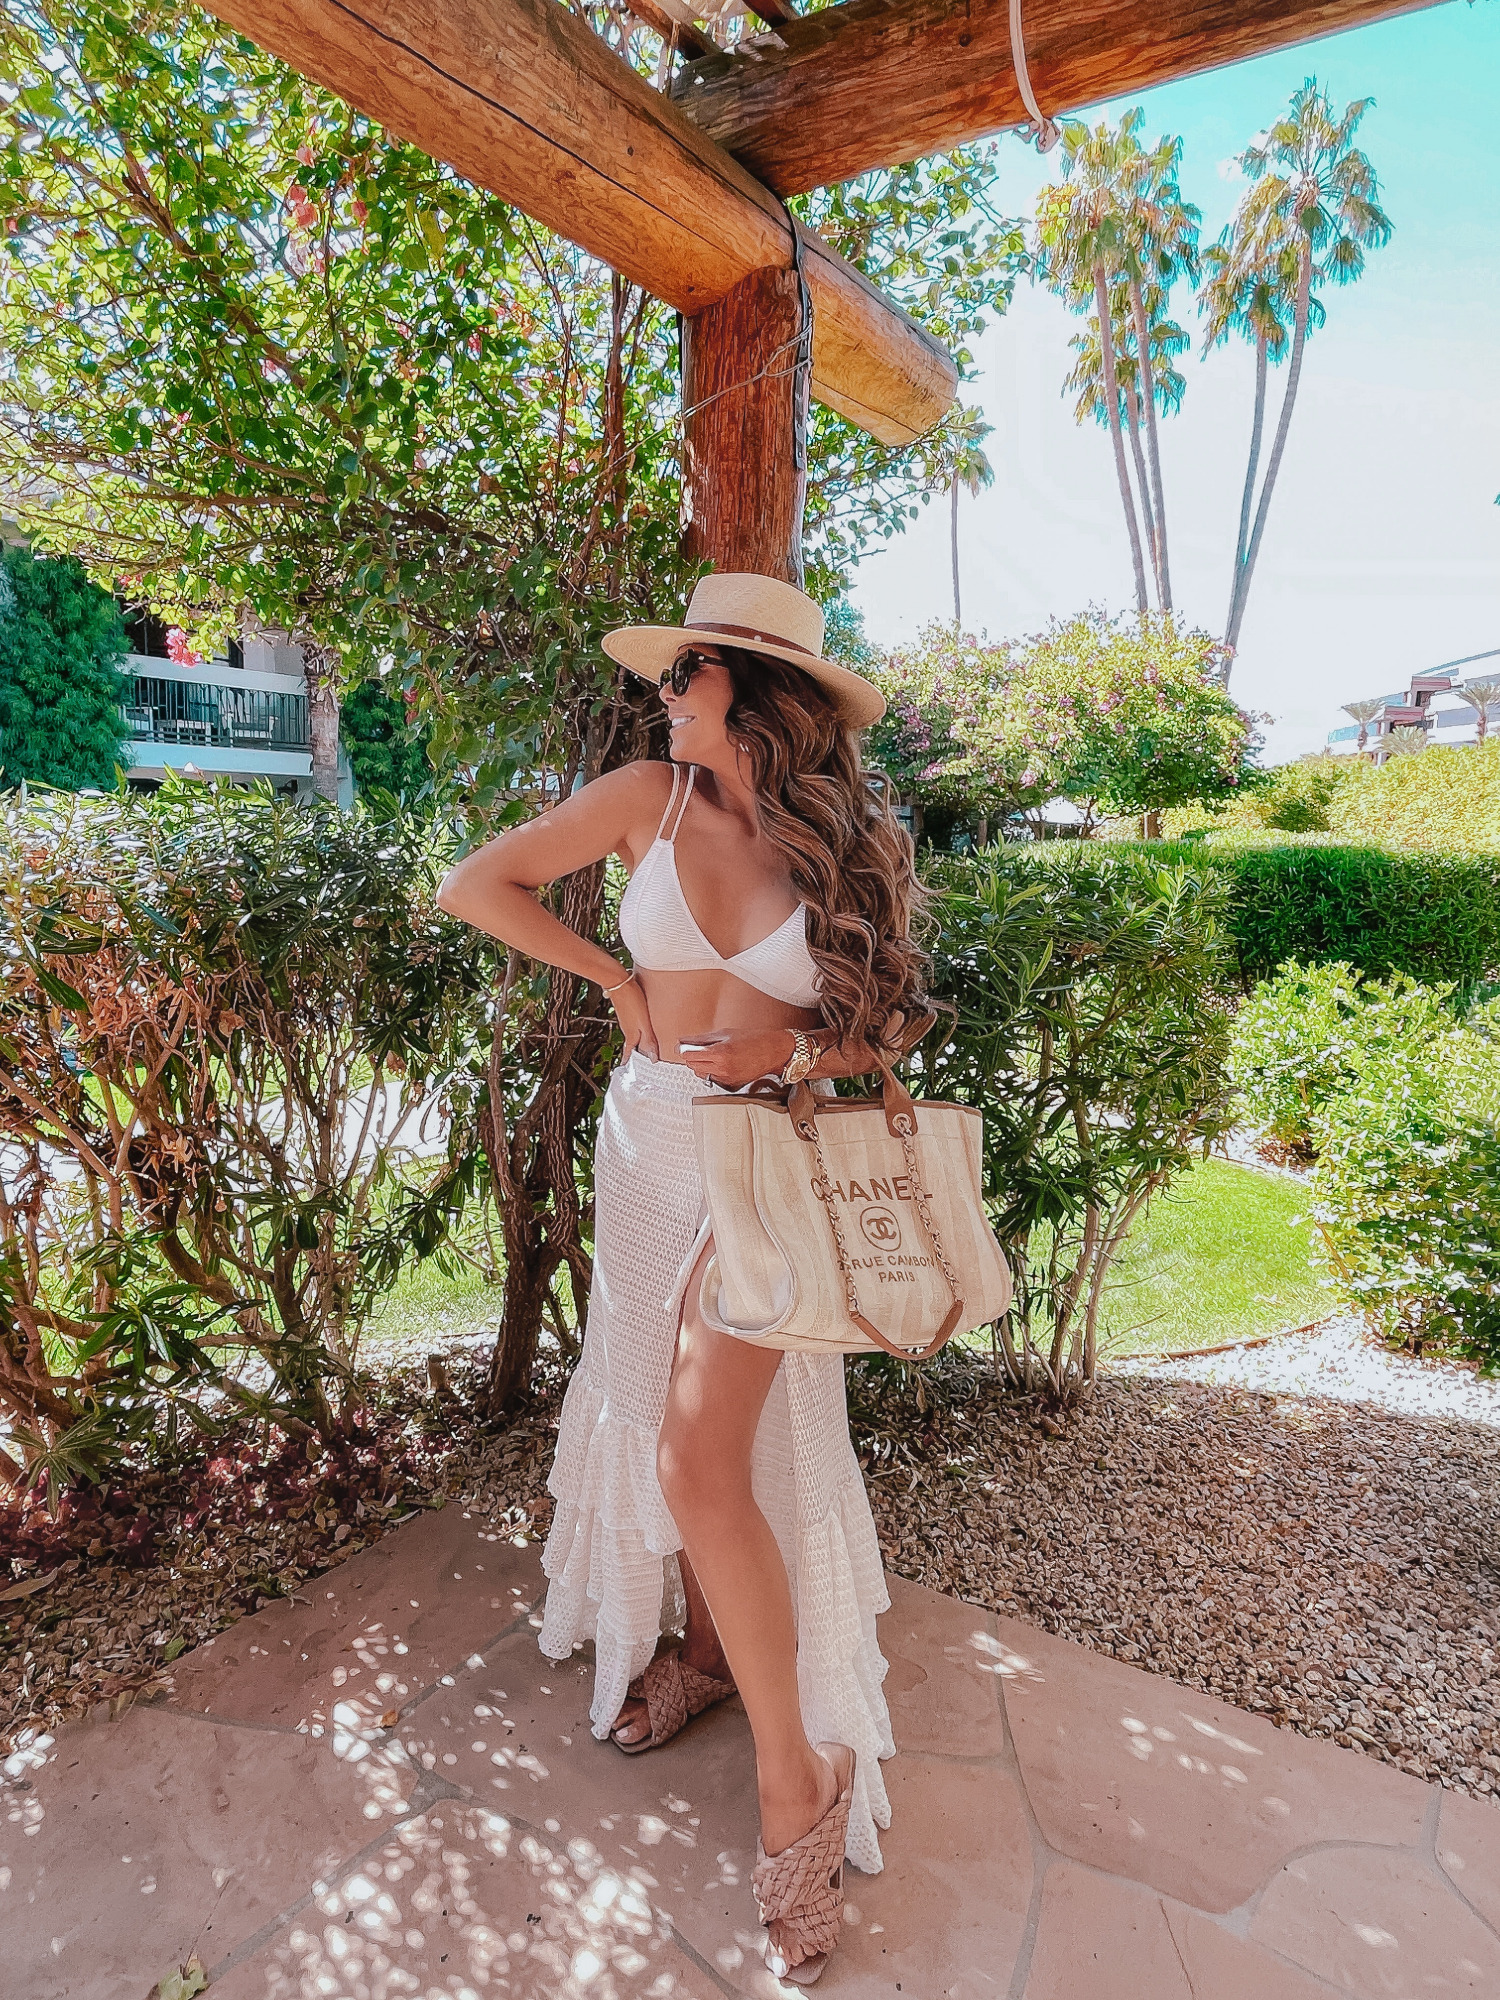 Steve Madden Marina Sandal, Best Amazon Swimsuits 2 piece high waisted, Scottsdale Fashion blogger, Emily Gemma, The Scott Resort, Chanel Deauville tan & cream large |Instagram Recap by popular US fashion blog, The Sweetest Thing: image of Emily Gemma wearing a white two piece swim suit, white coverup, beige braid strap sandals, and straw sun hat. 